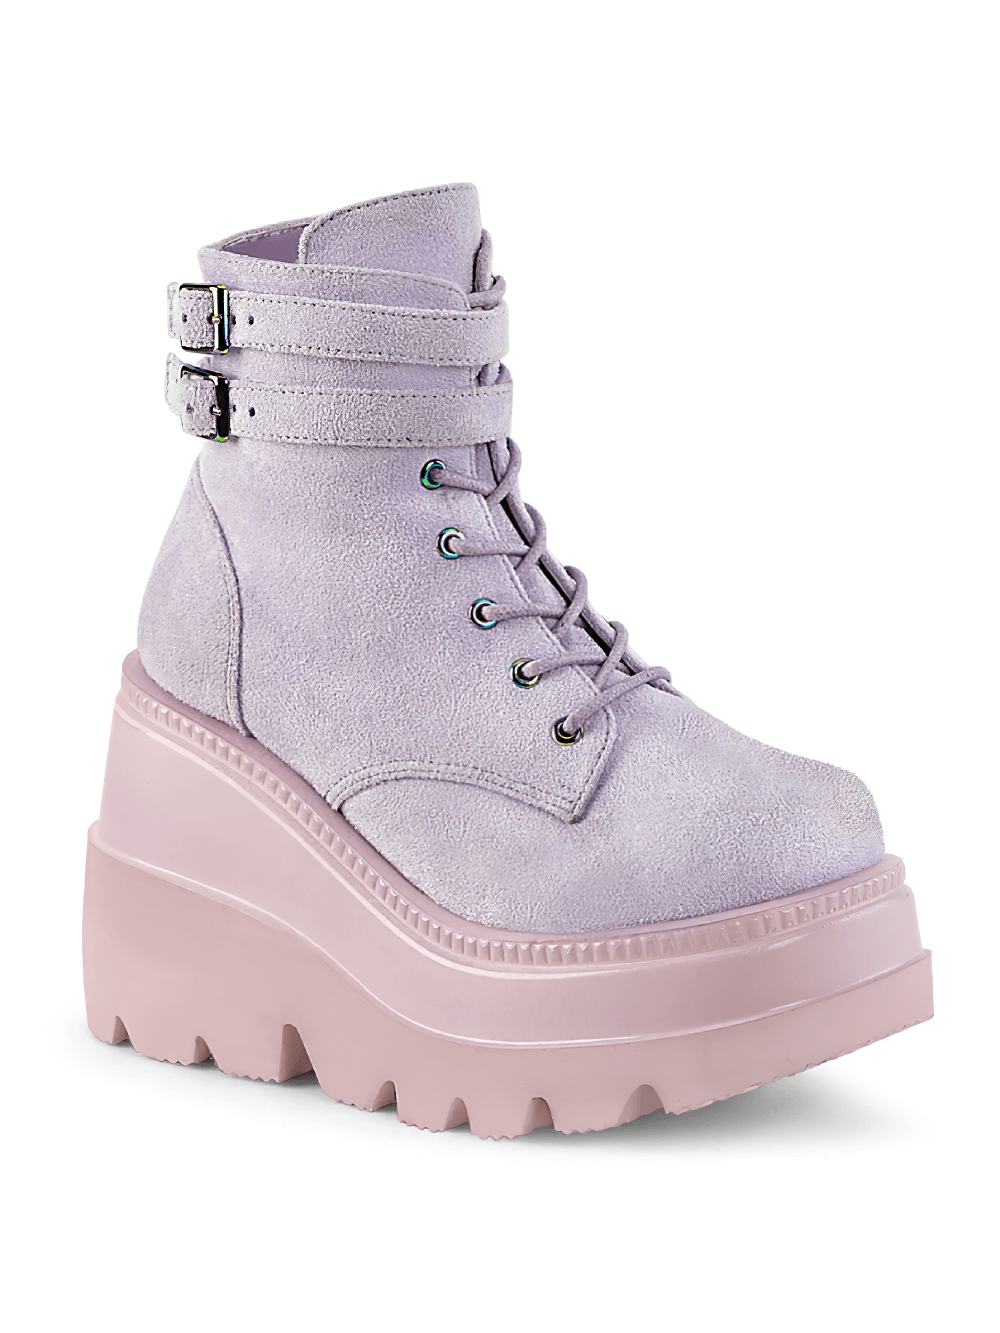 DEMONIA Lavender Wedge Platform Ankle Boots with Buckled Straps